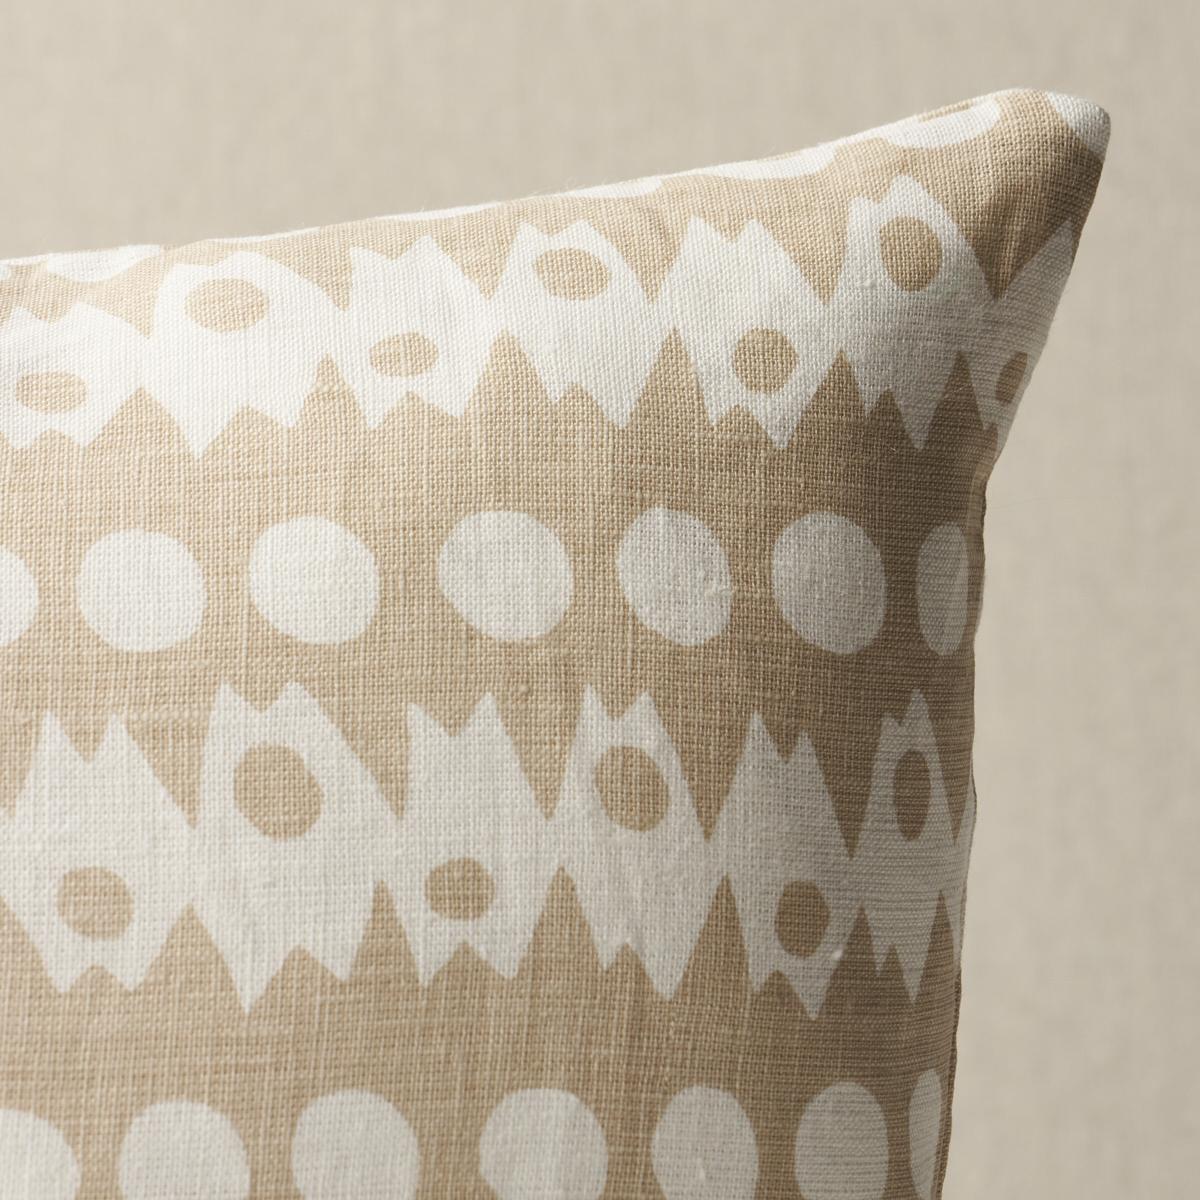 This pillow features Trickledown by Drusus Tabor with a knife edge finish. Created in collaboration with Drusus Tabor and printed by hand on a soft linen ground, Trickledown has the subtle variations and wonderful nuances that make artisanal